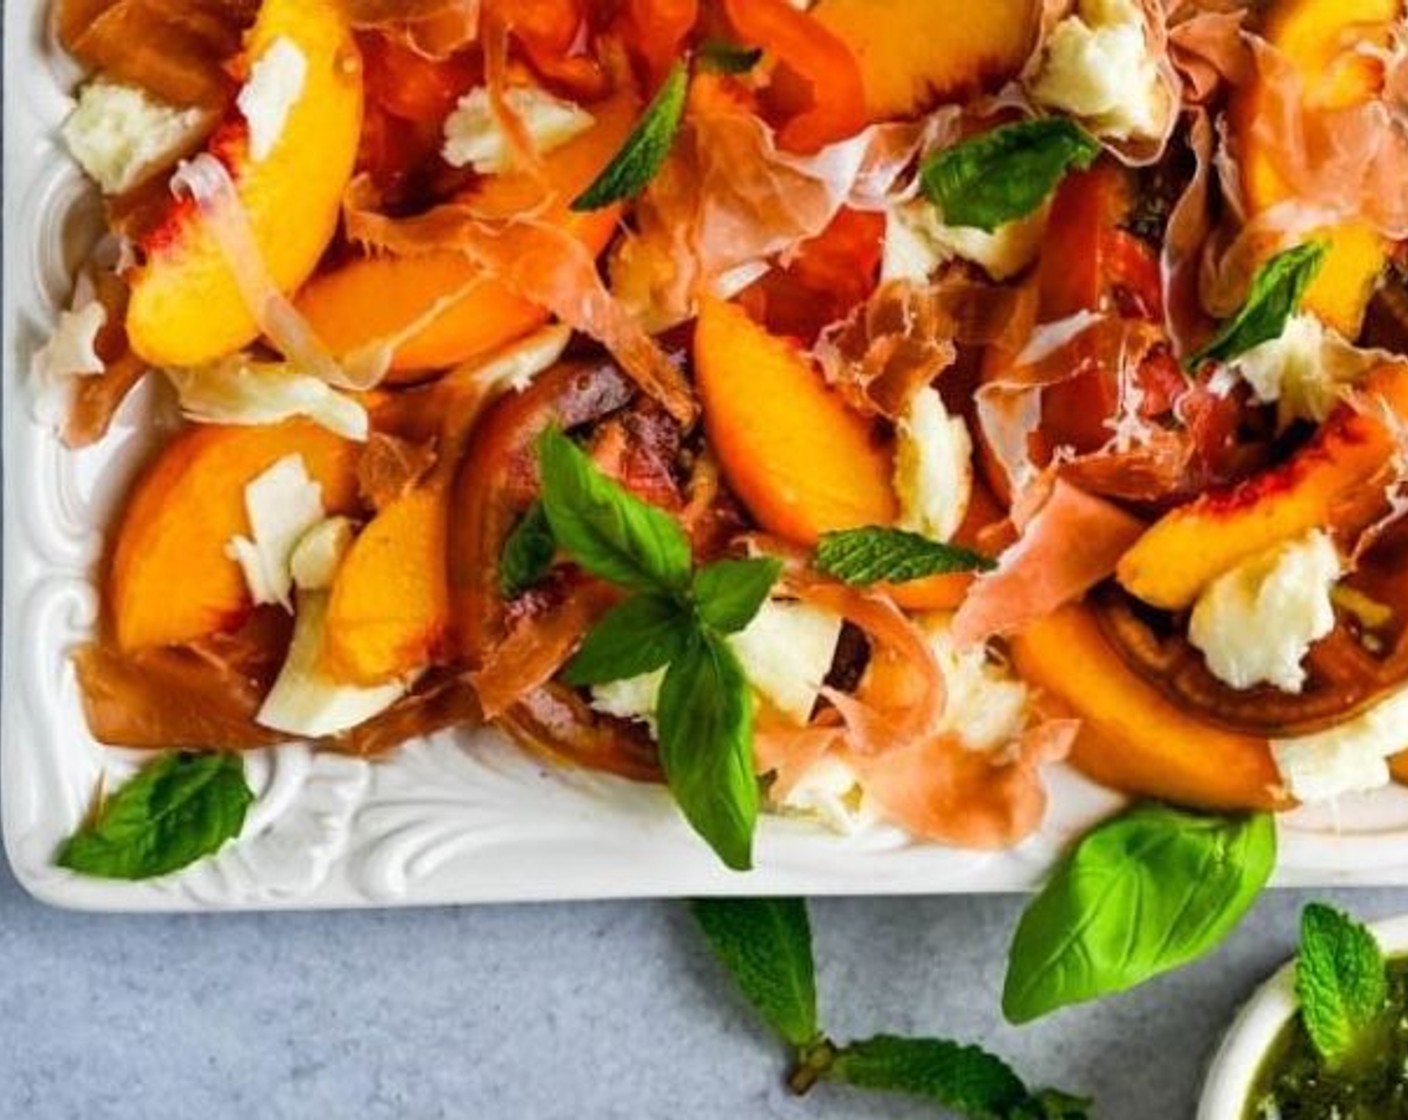 step 5 Chop or tear shards of prosciutto and scatter them over the peaches. Sprinkle with additional parsley.